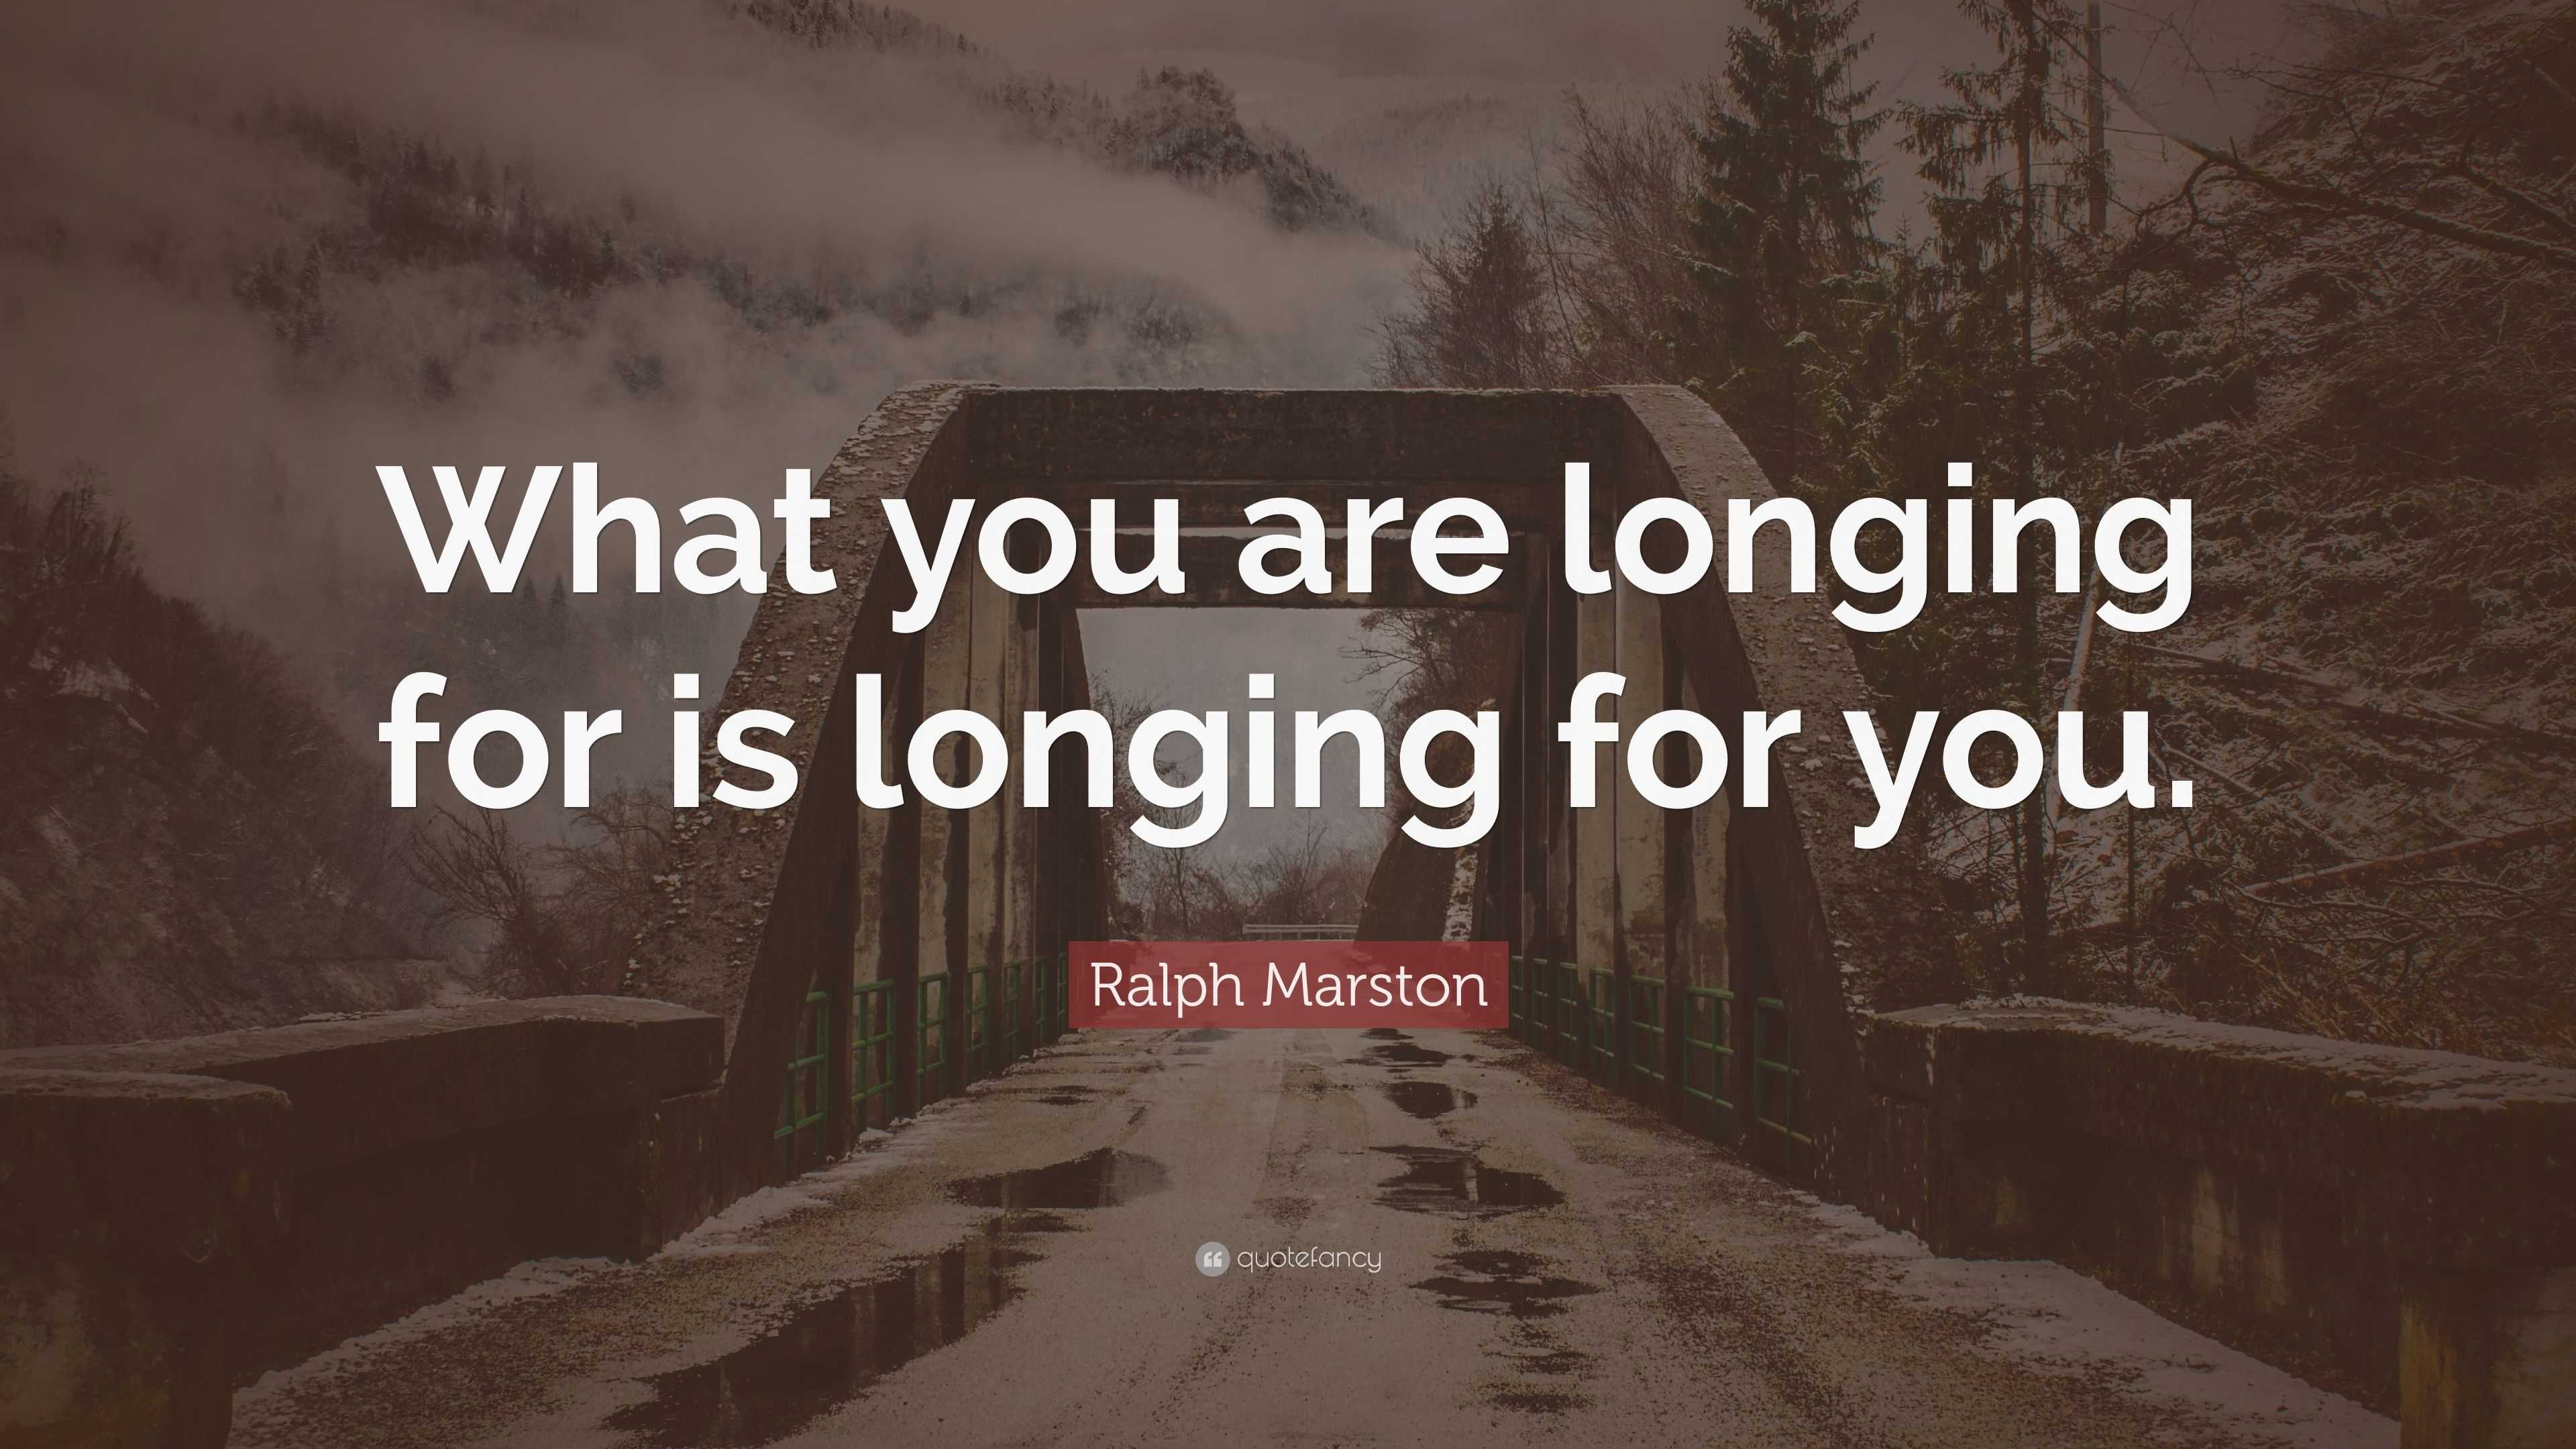 Ralph Marston Quote: “What you are longing for is longing for you.”